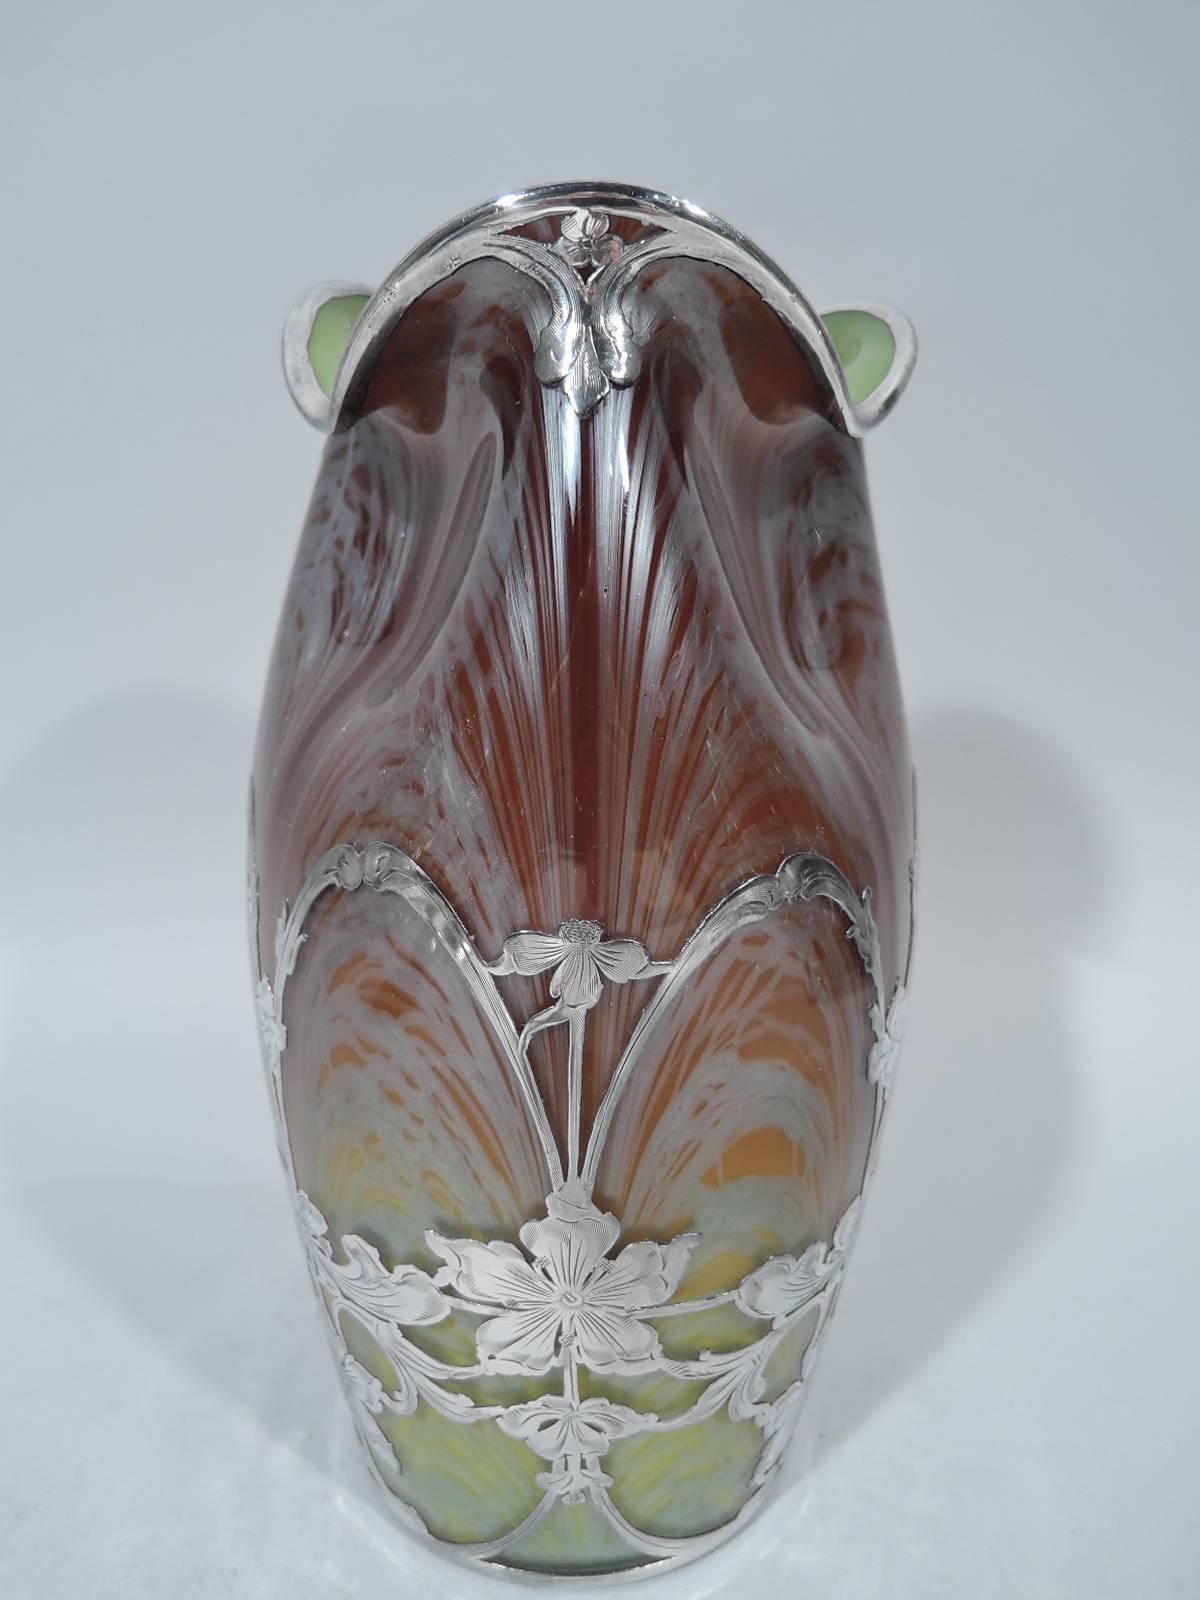 Beautiful art glass vase with silver overlay by historic Czech maker Loetz, circa 1900. Ovoid with pinched and asymmetrical mouth with shaded color and white feathering. Vase interior green. Silver overlay in form of floral arcade. Glass unsigned.